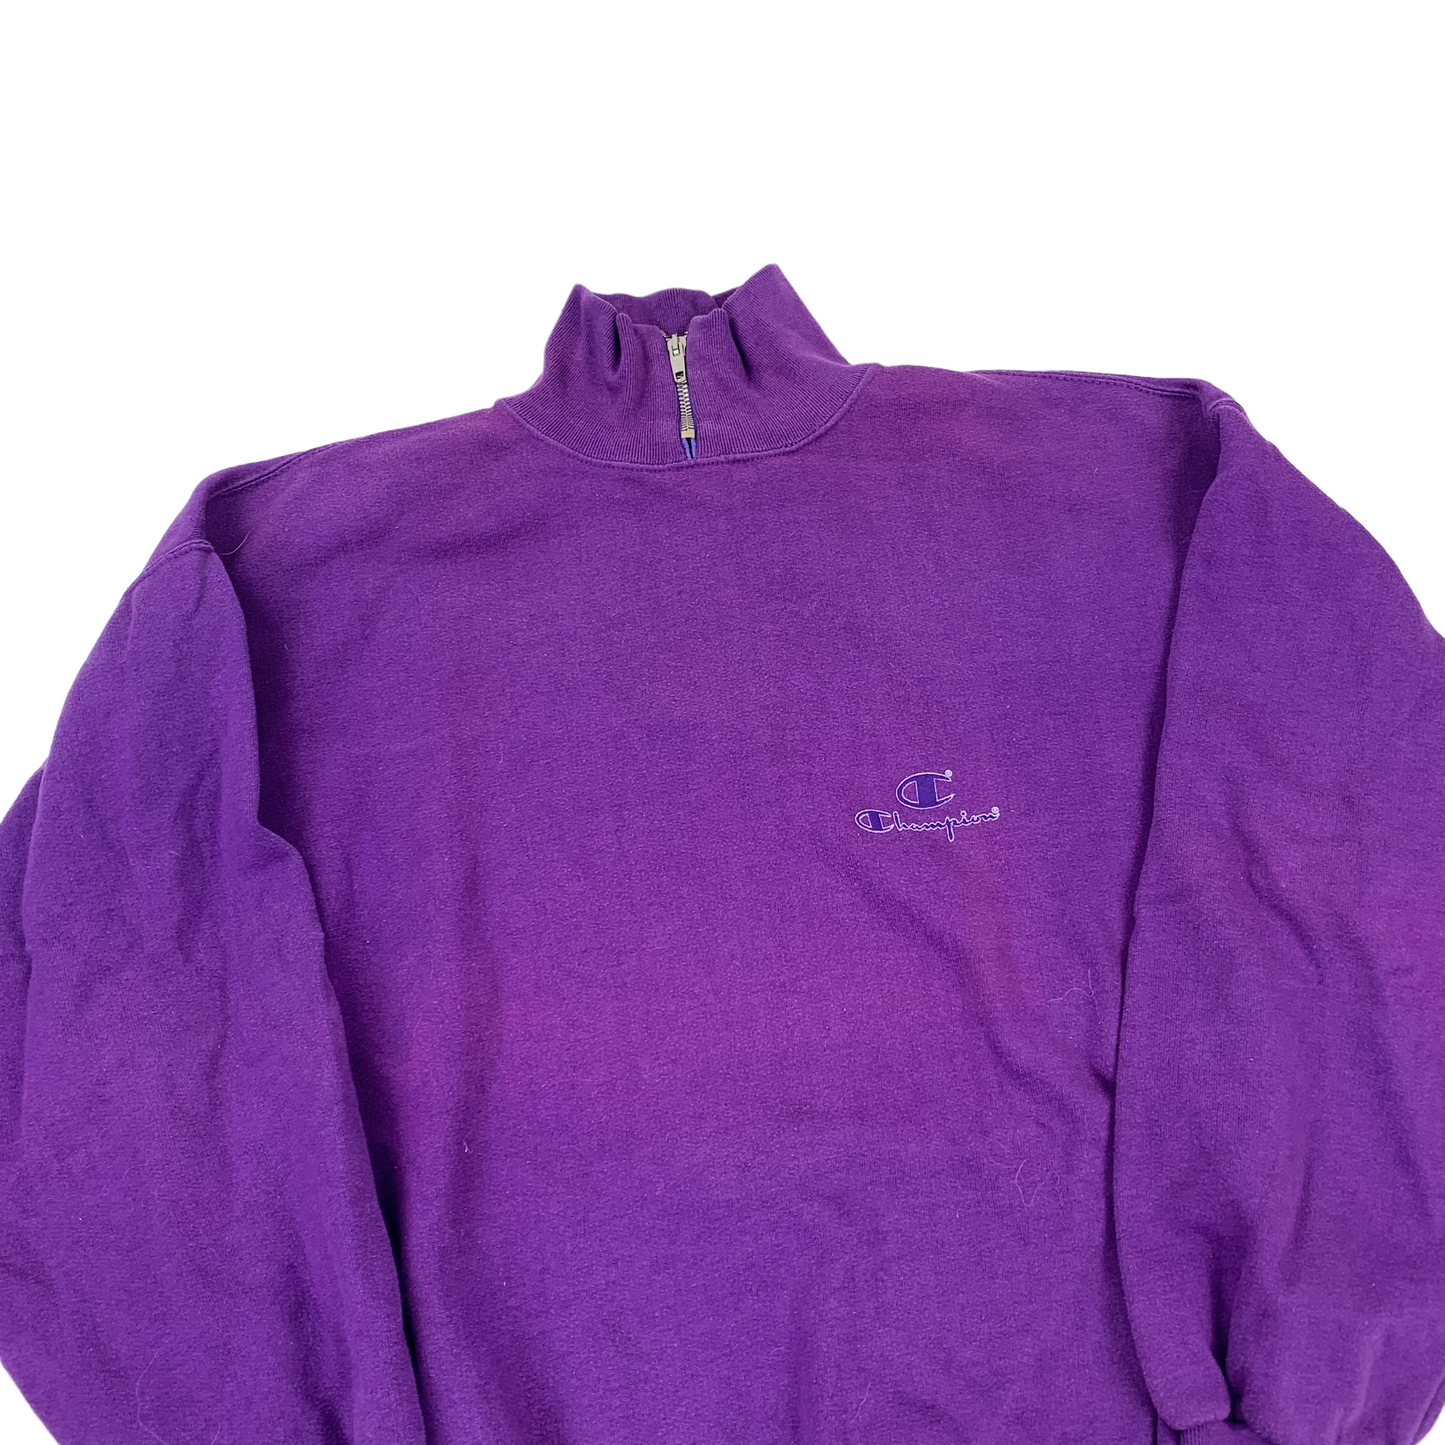 Vintage Champion Sweater-Sweaters-pufferseason-secondhand-shop-austria-vintage-puffer-down-coat-sustainable